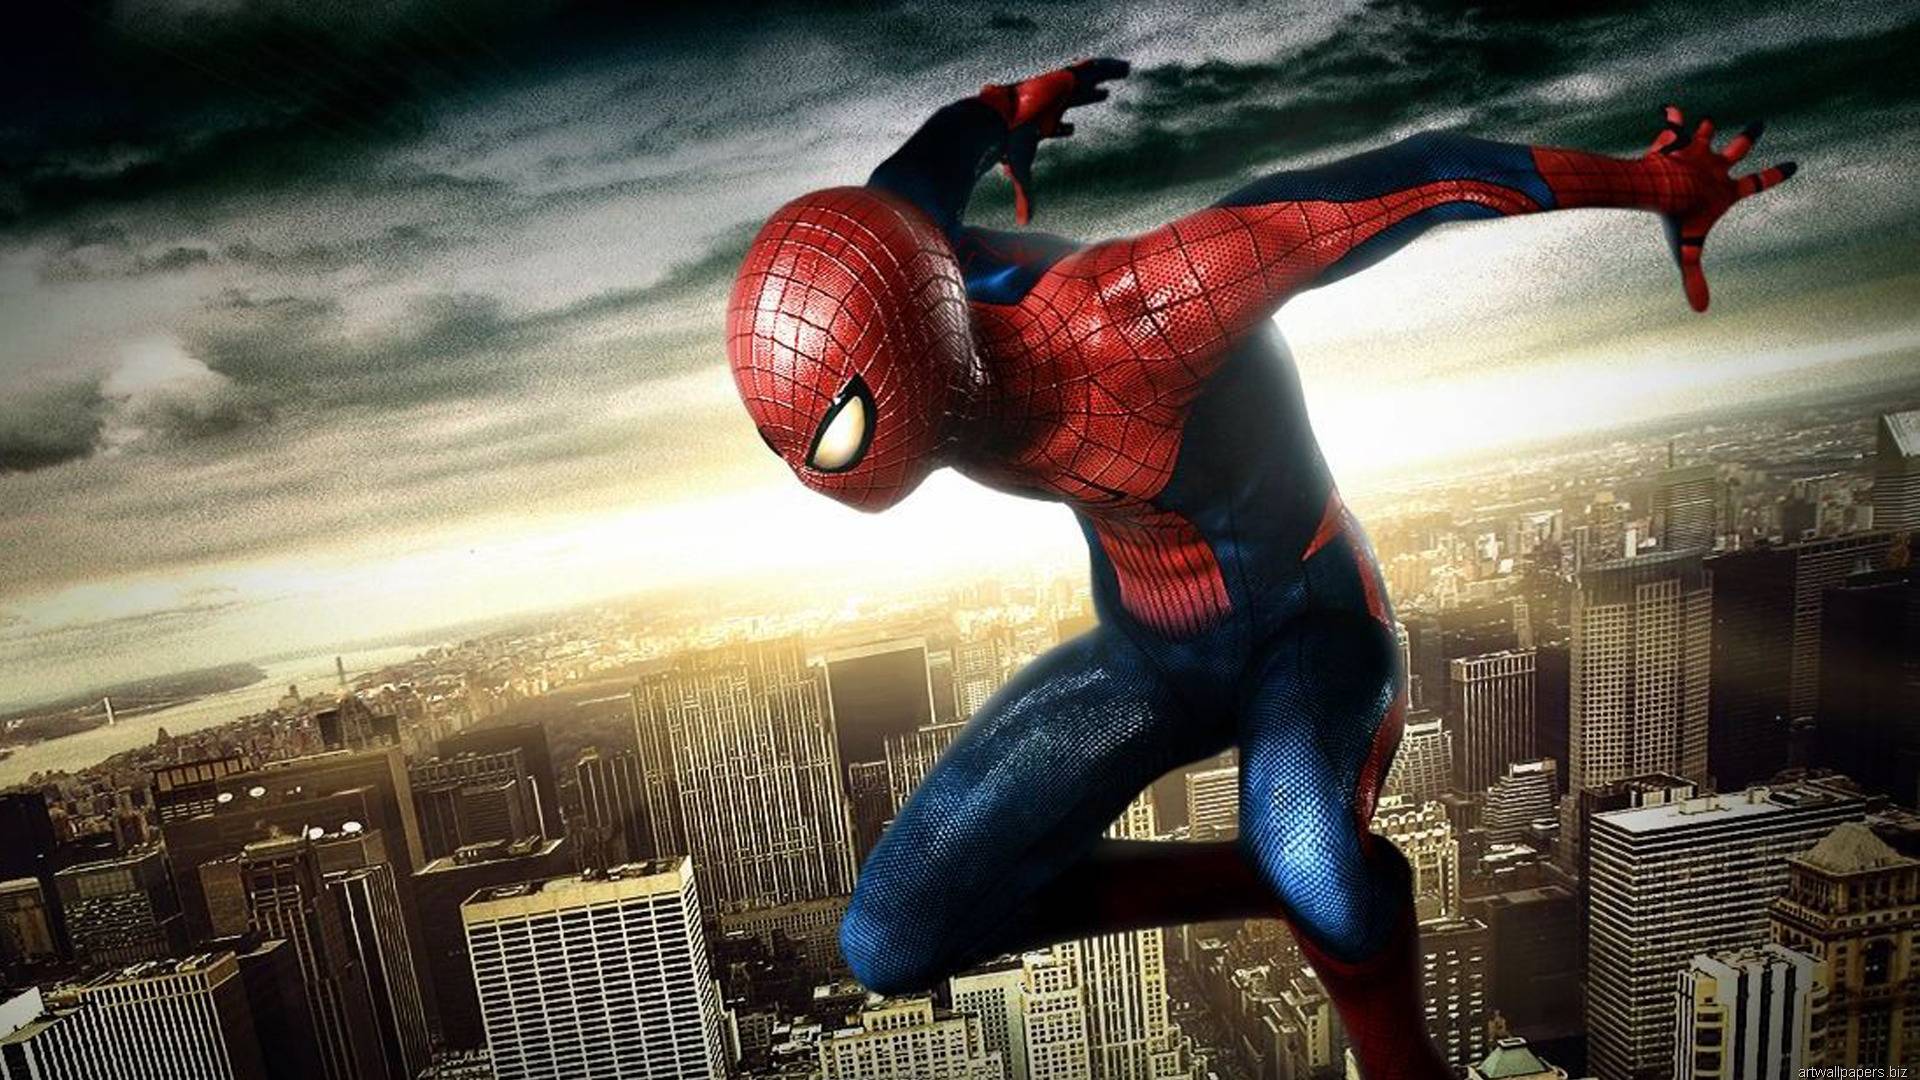 77+ Spectacular Spider Man Wallpapers.